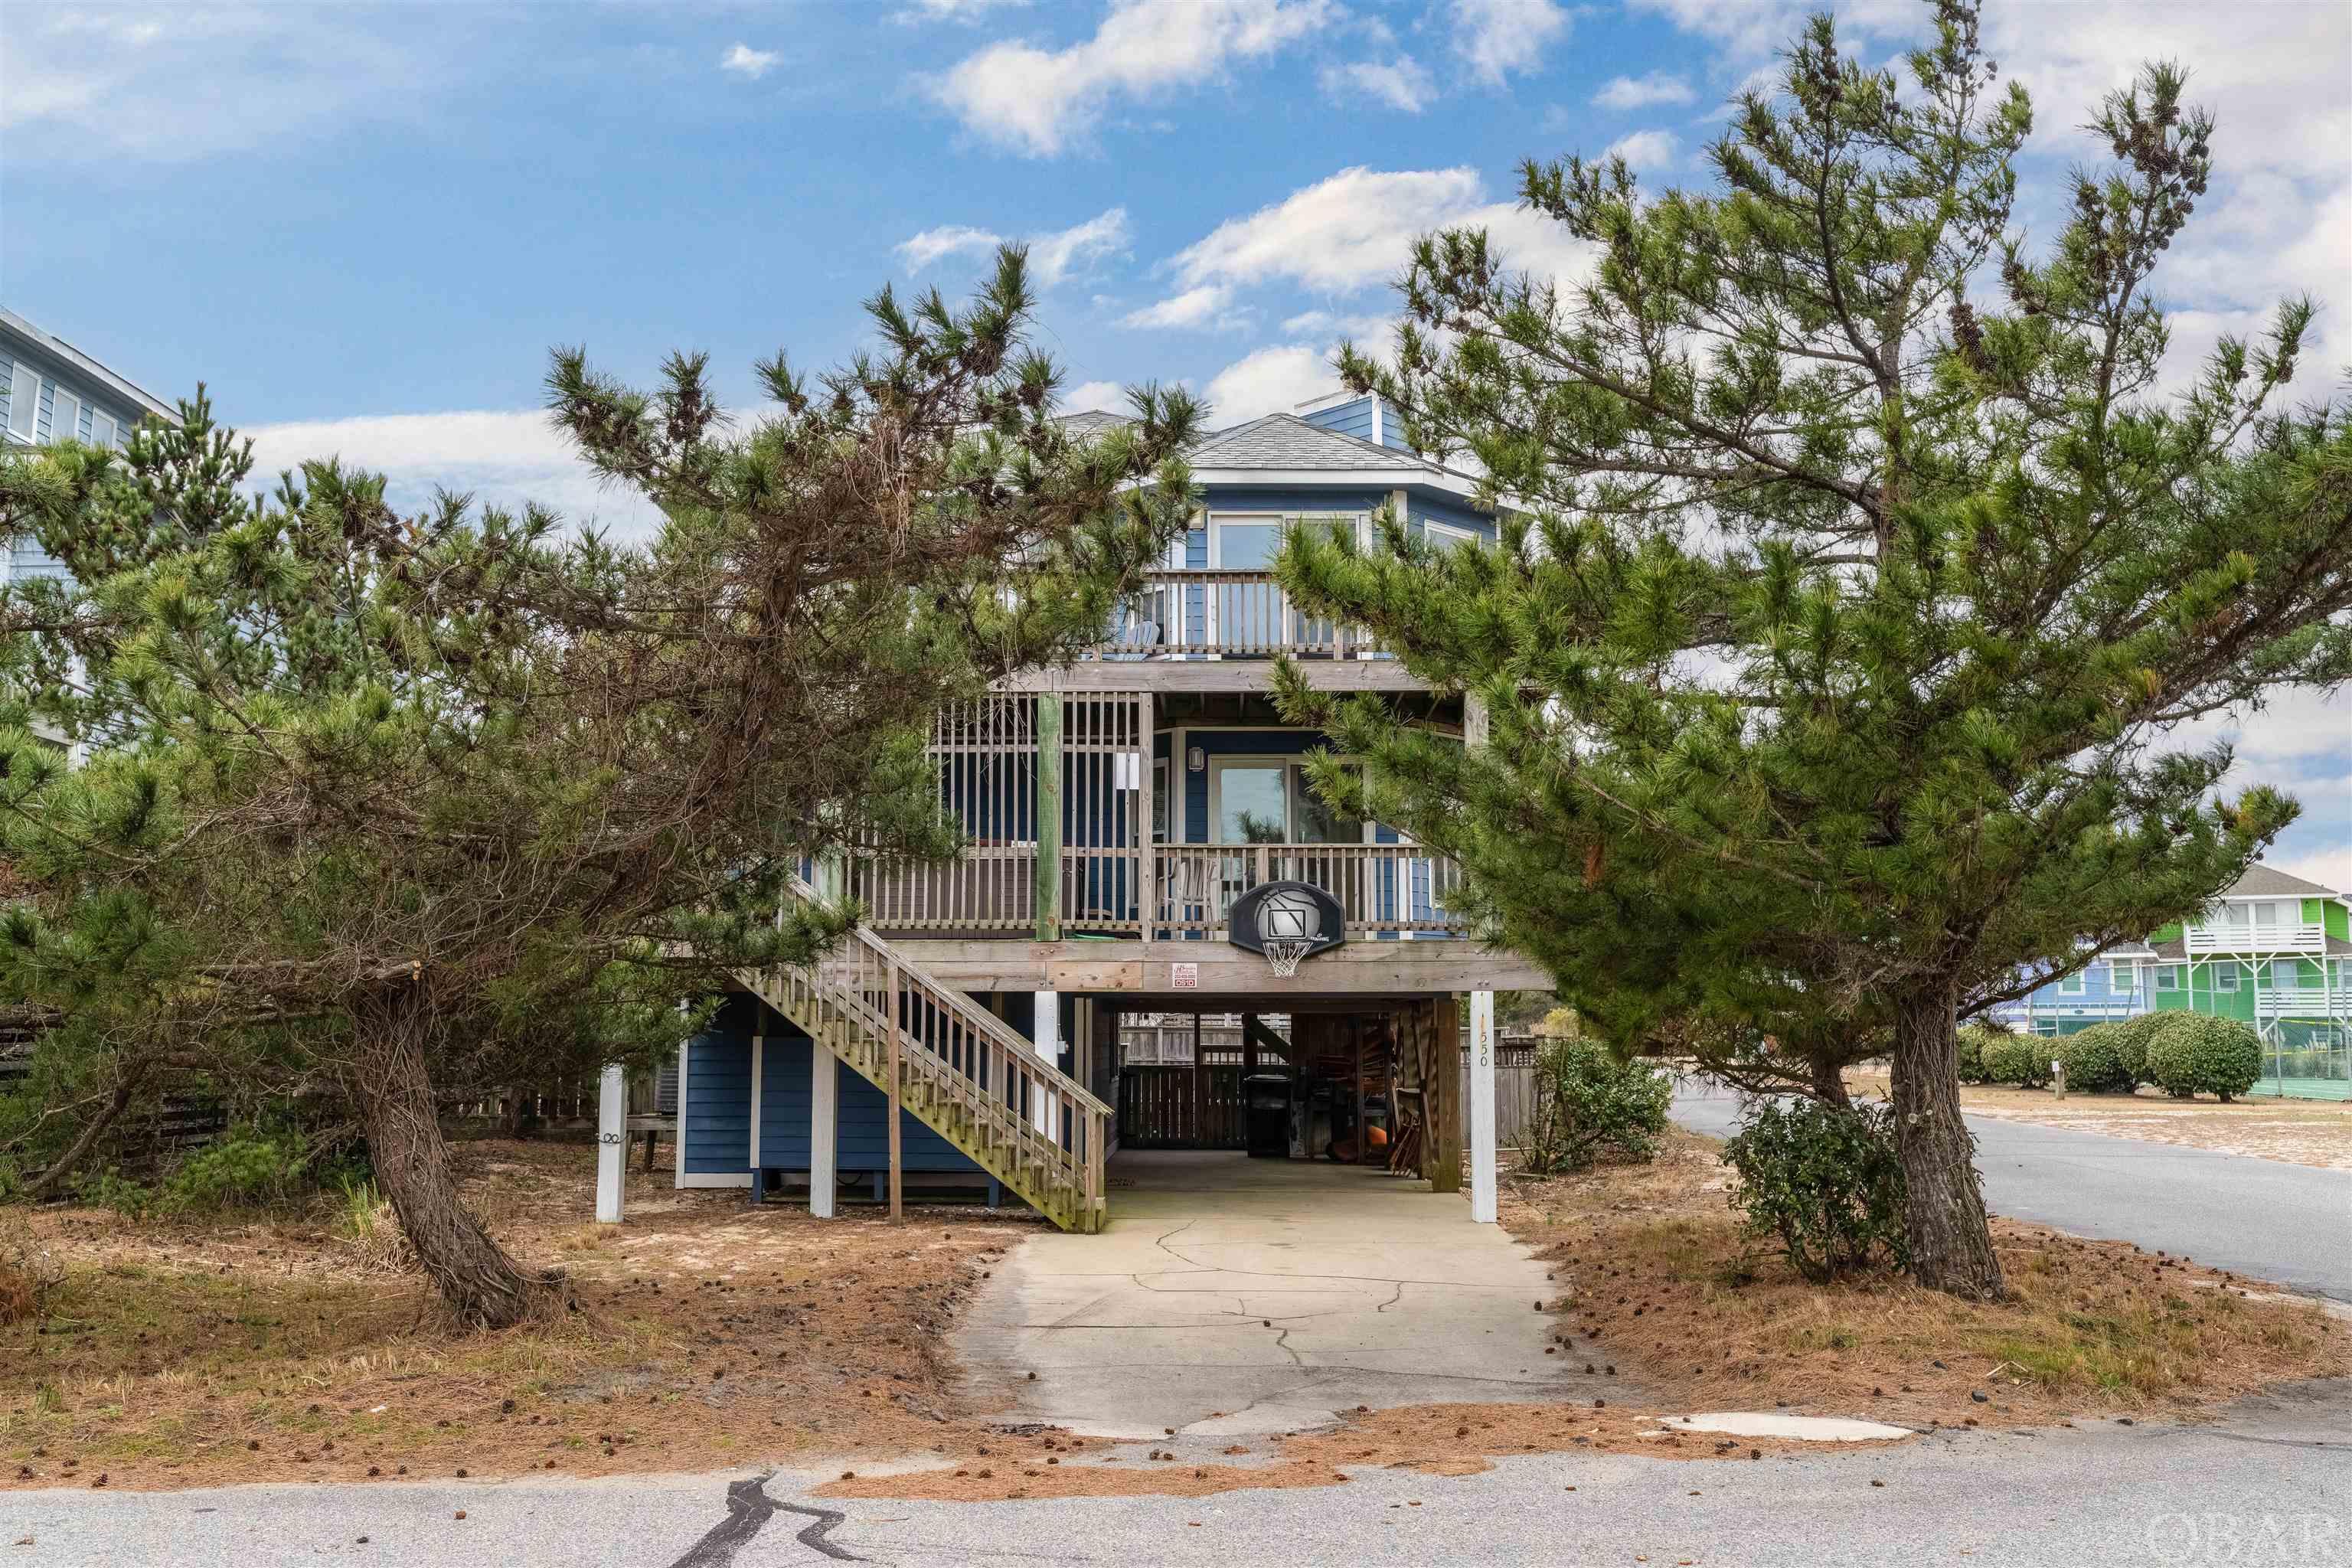 550 Porpoise Point, Corolla, NC 27927, 4 Bedrooms Bedrooms, ,3 BathroomsBathrooms,Residential,For sale,Porpoise Point,124399